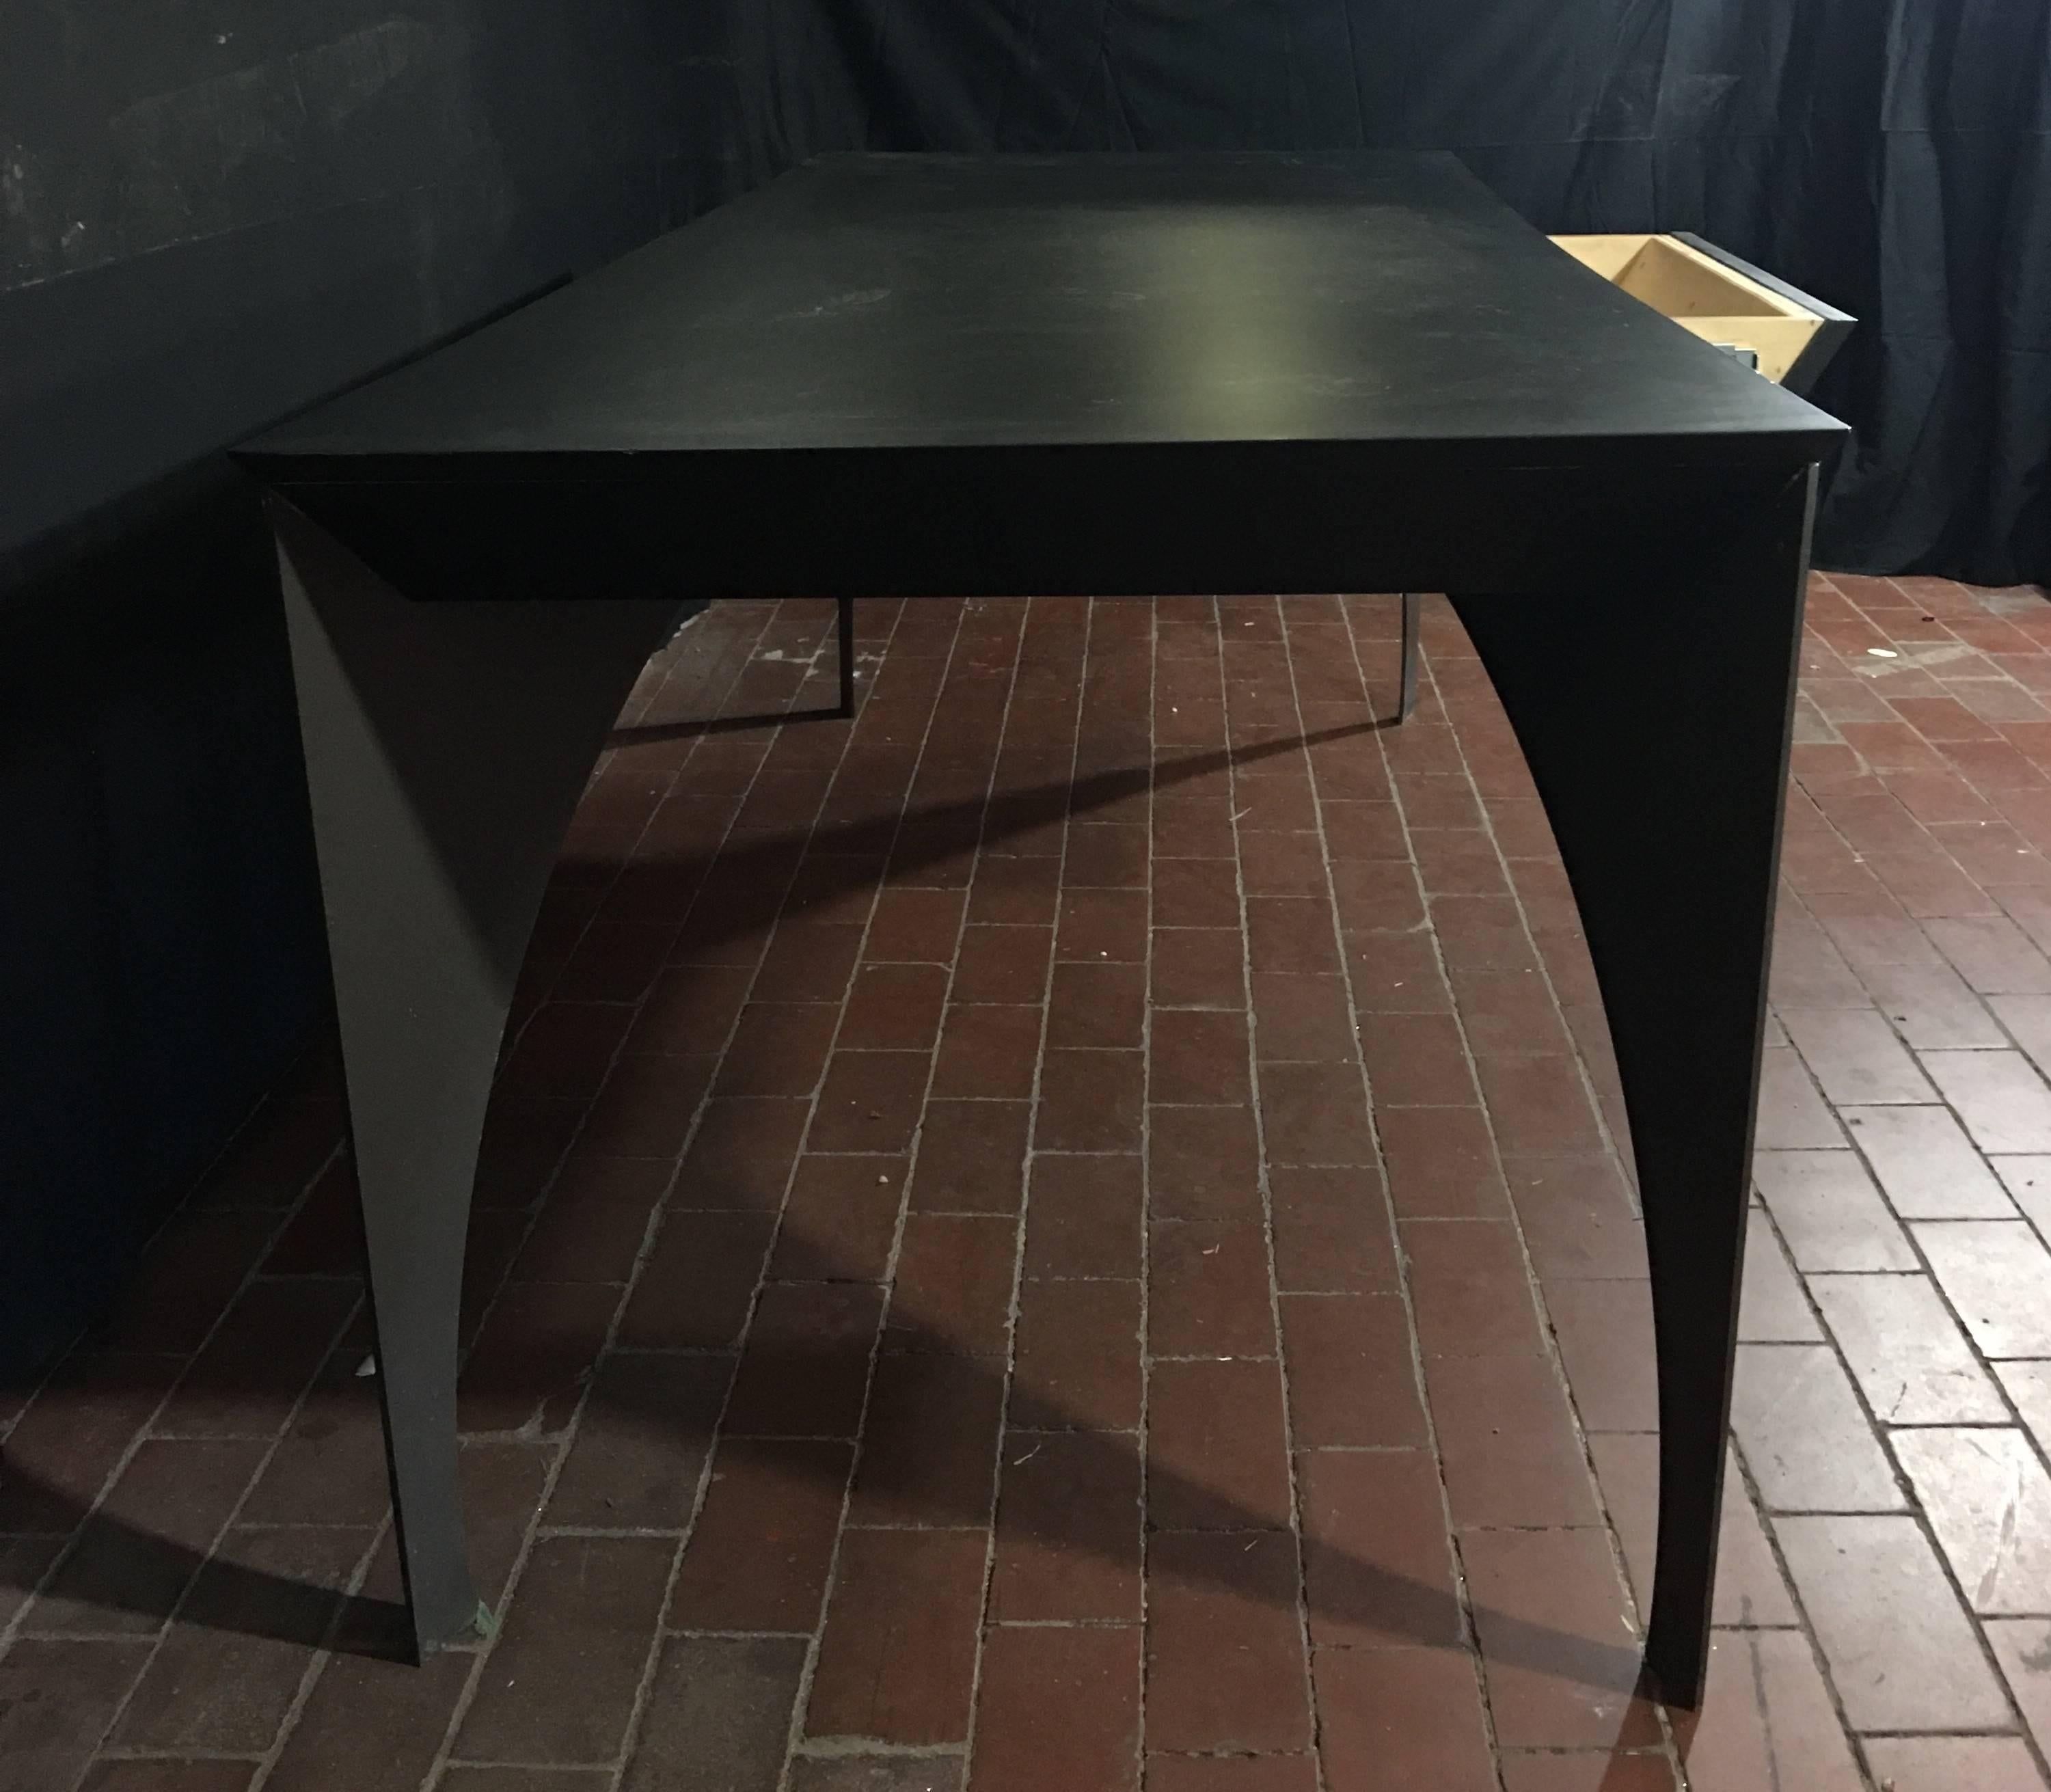 Custom one-of-a-kind table or desk in steel and lacquered wood. The steel arched legs are finished in a satin gun metal gray, the mitered edge, solid wood top is lacquered in a flat black finish. The table contains a single drawer the is 26